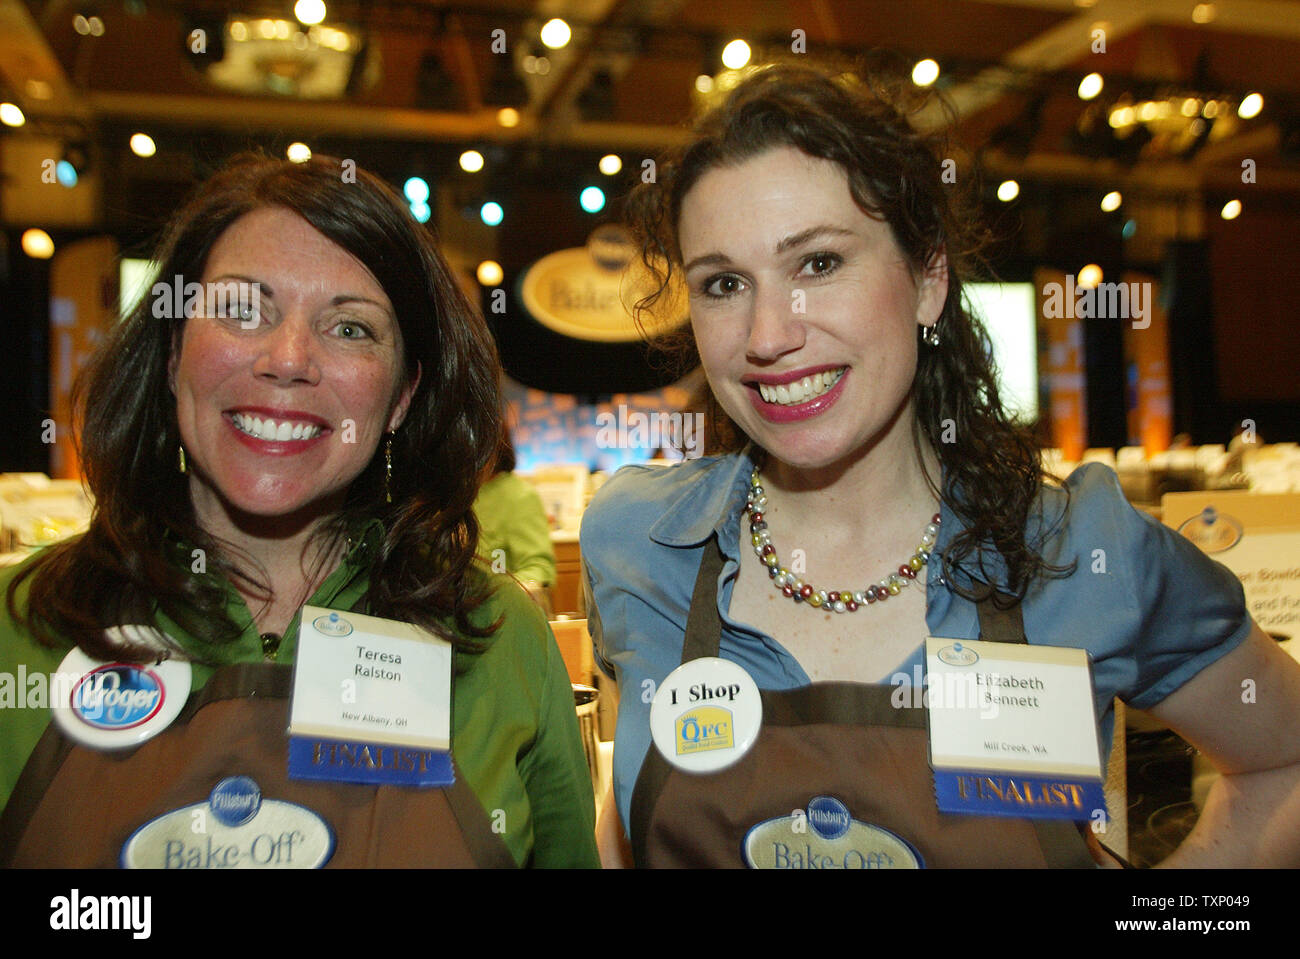 Finalists Teresa Ralston of New Albany, Ohio (L) and Elizabeth Bennett of Mill Creek, Washington are two of the 100 finalists at the Pillsbury Bake-Off Contest in Dallas on April 14, 2008. Tomorrow, one of the contestants cooking at the Fairmount Hotel will win $1 million. (UPI Photo/Robert Hughes) Stock Photo